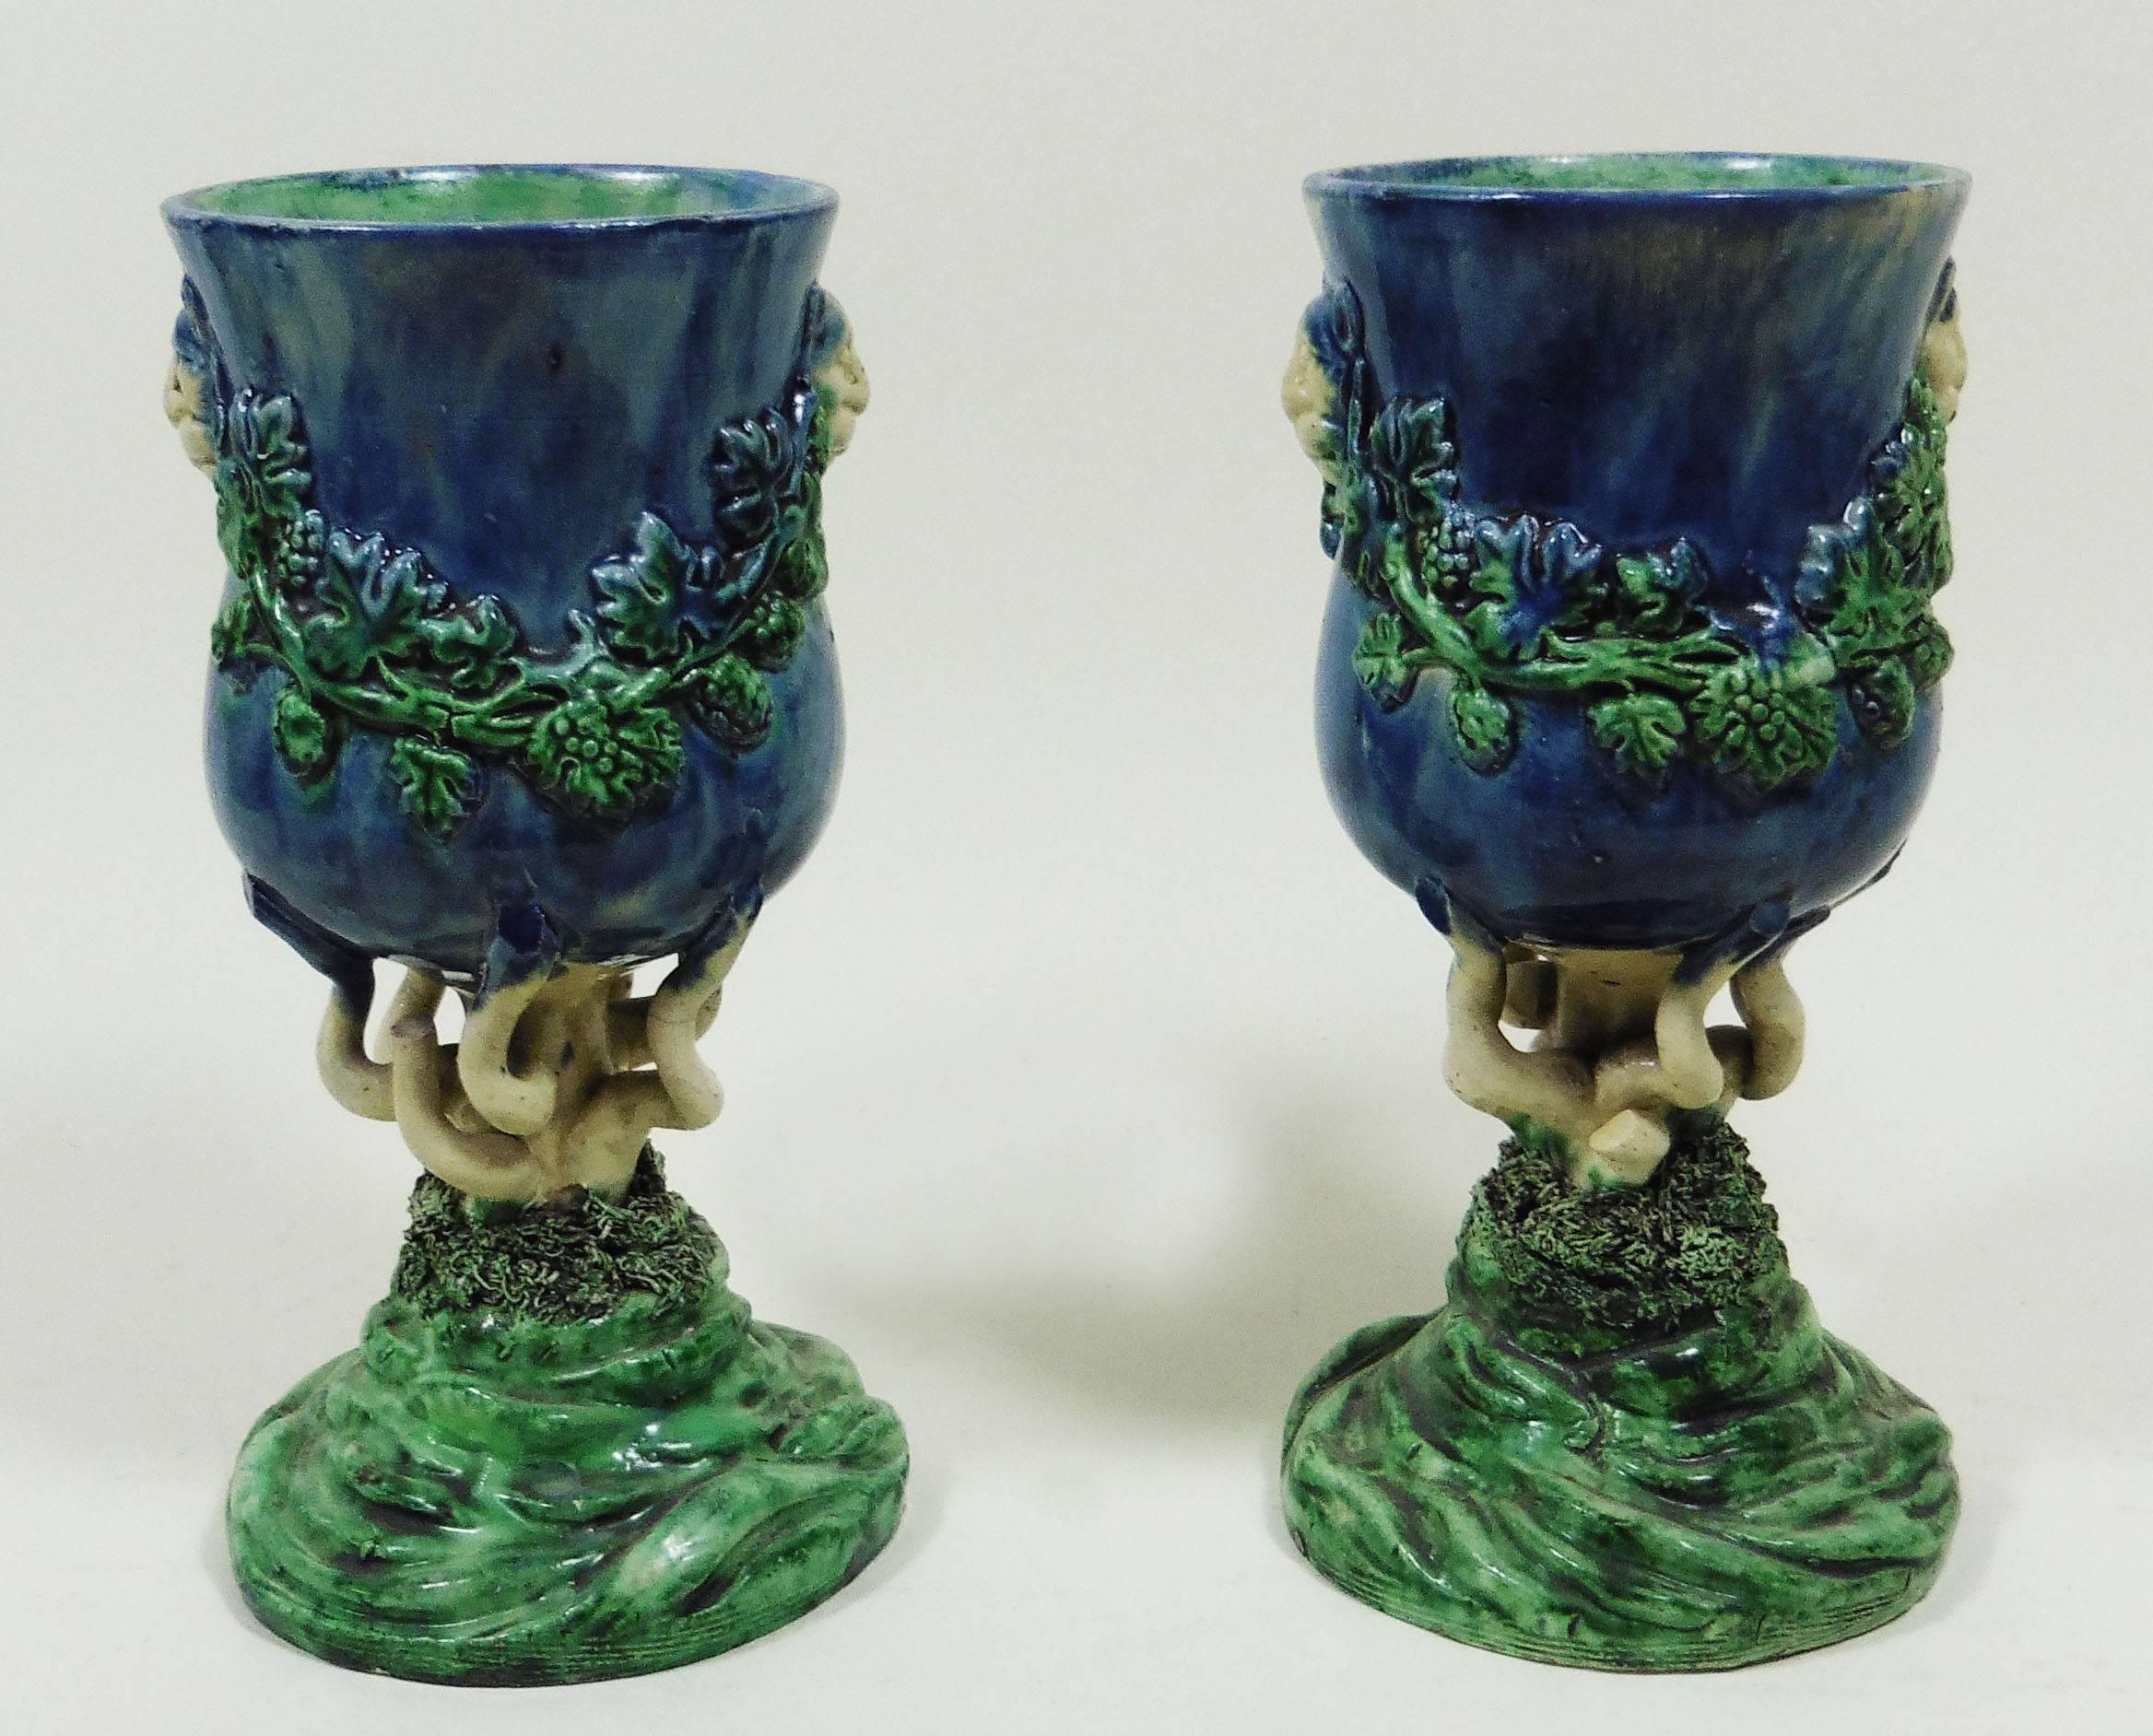 Pair of 19th century Palissy chalices with lions heads and grapes garlands, the feets are stylized seaweeds in a Renaissance style.
Attributed to the School of Paris.
Hairline on the back of one chalice.
The School of Paris was composed by makers